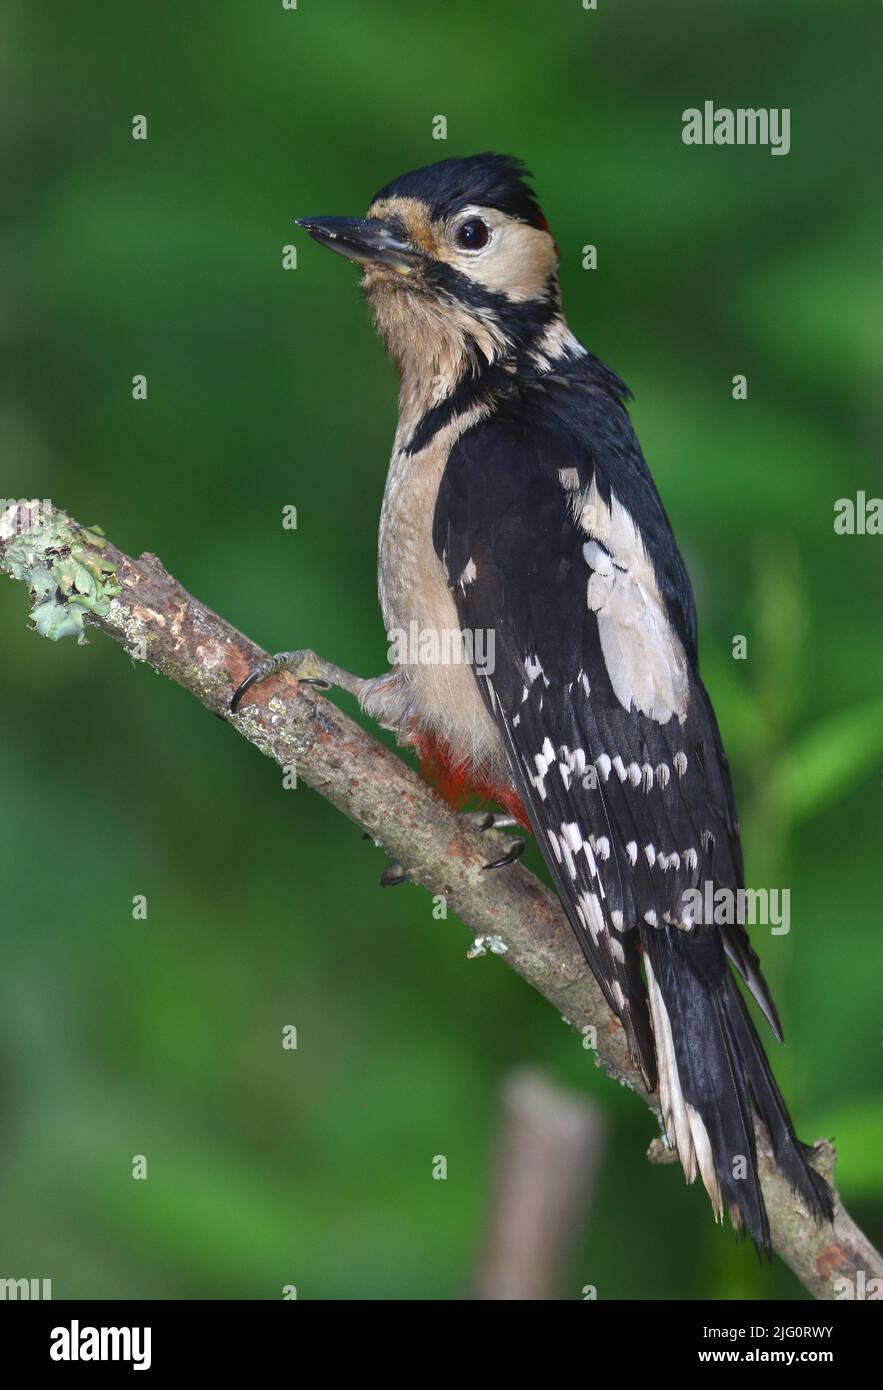 Adult female great spotted woodpecker in aggressive display posture Stock Photo